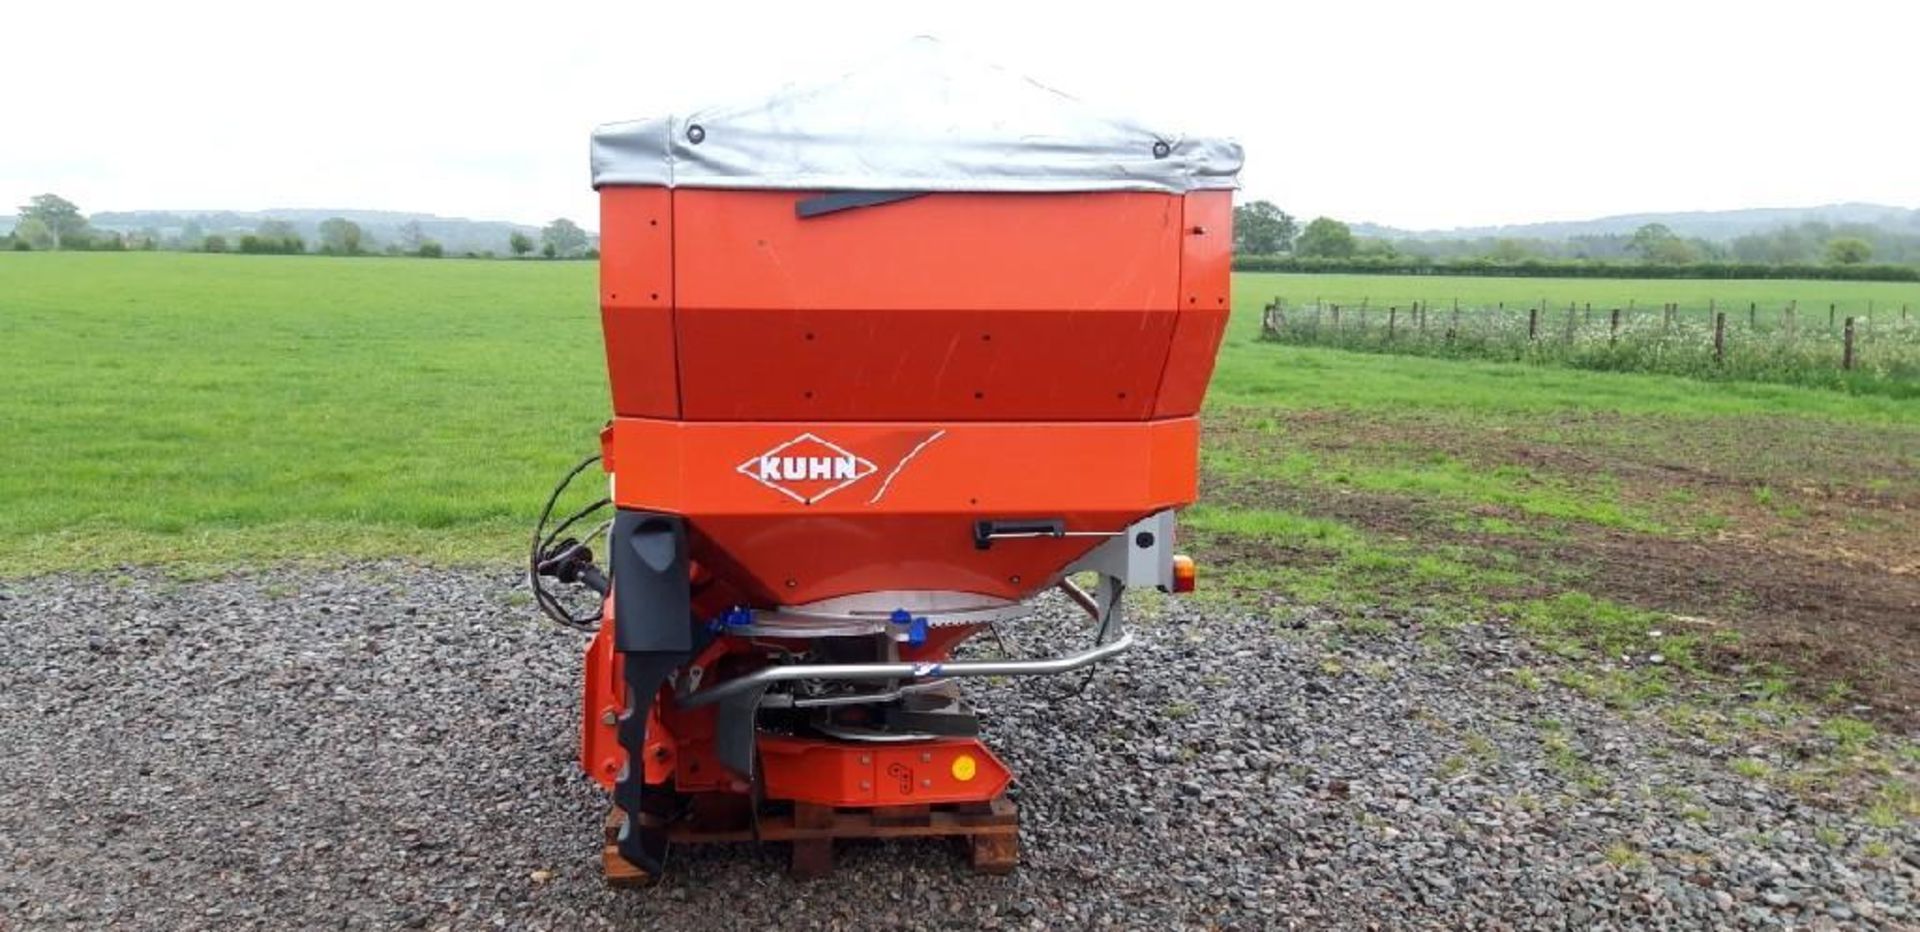 Kuhn Axis 40.1 W Weigh Cell Fertiliser Spreader - Image 3 of 14